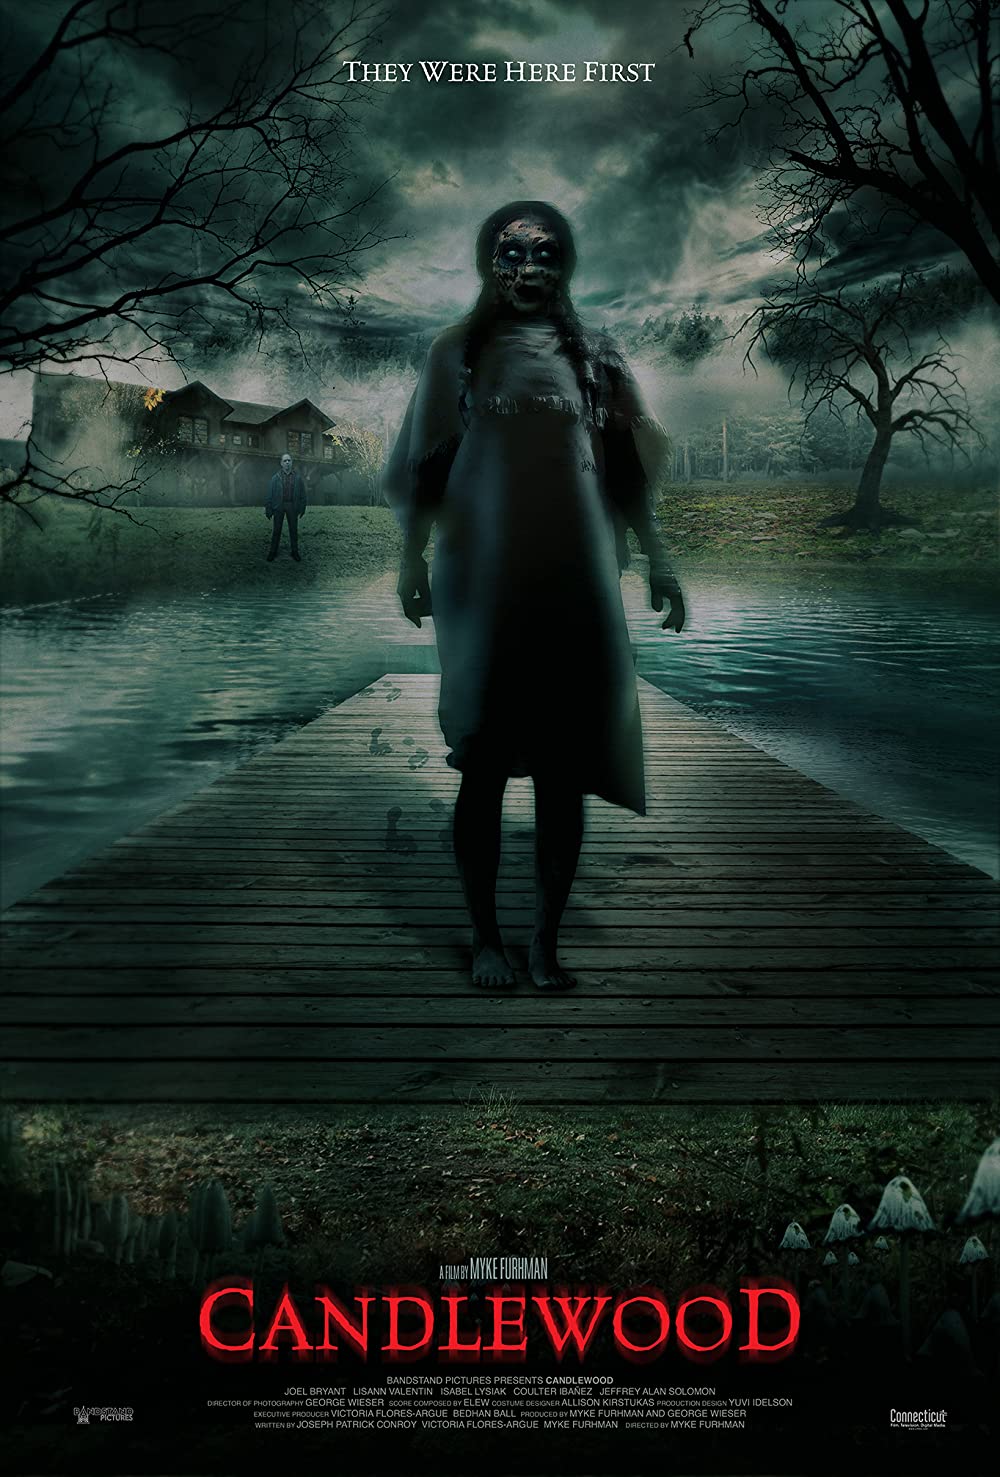 Movie poster for horror film Candlewood, filmed in New Milford, Connecticut